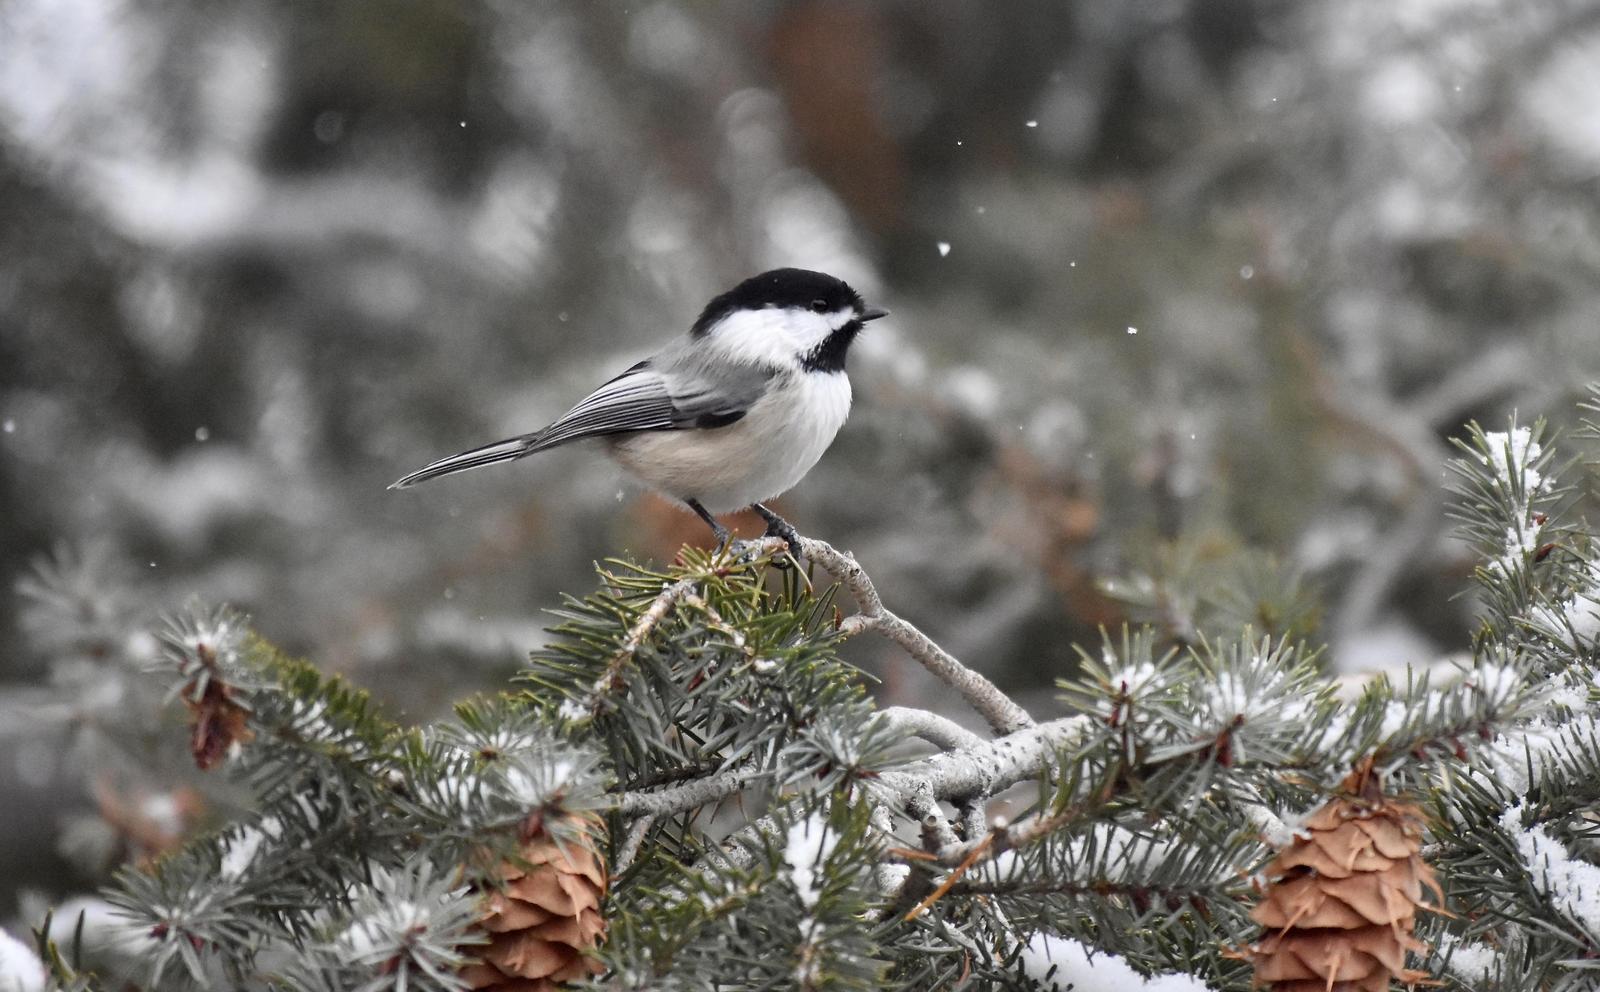 Black-capped Chickadee Photo by Evelyn [aret